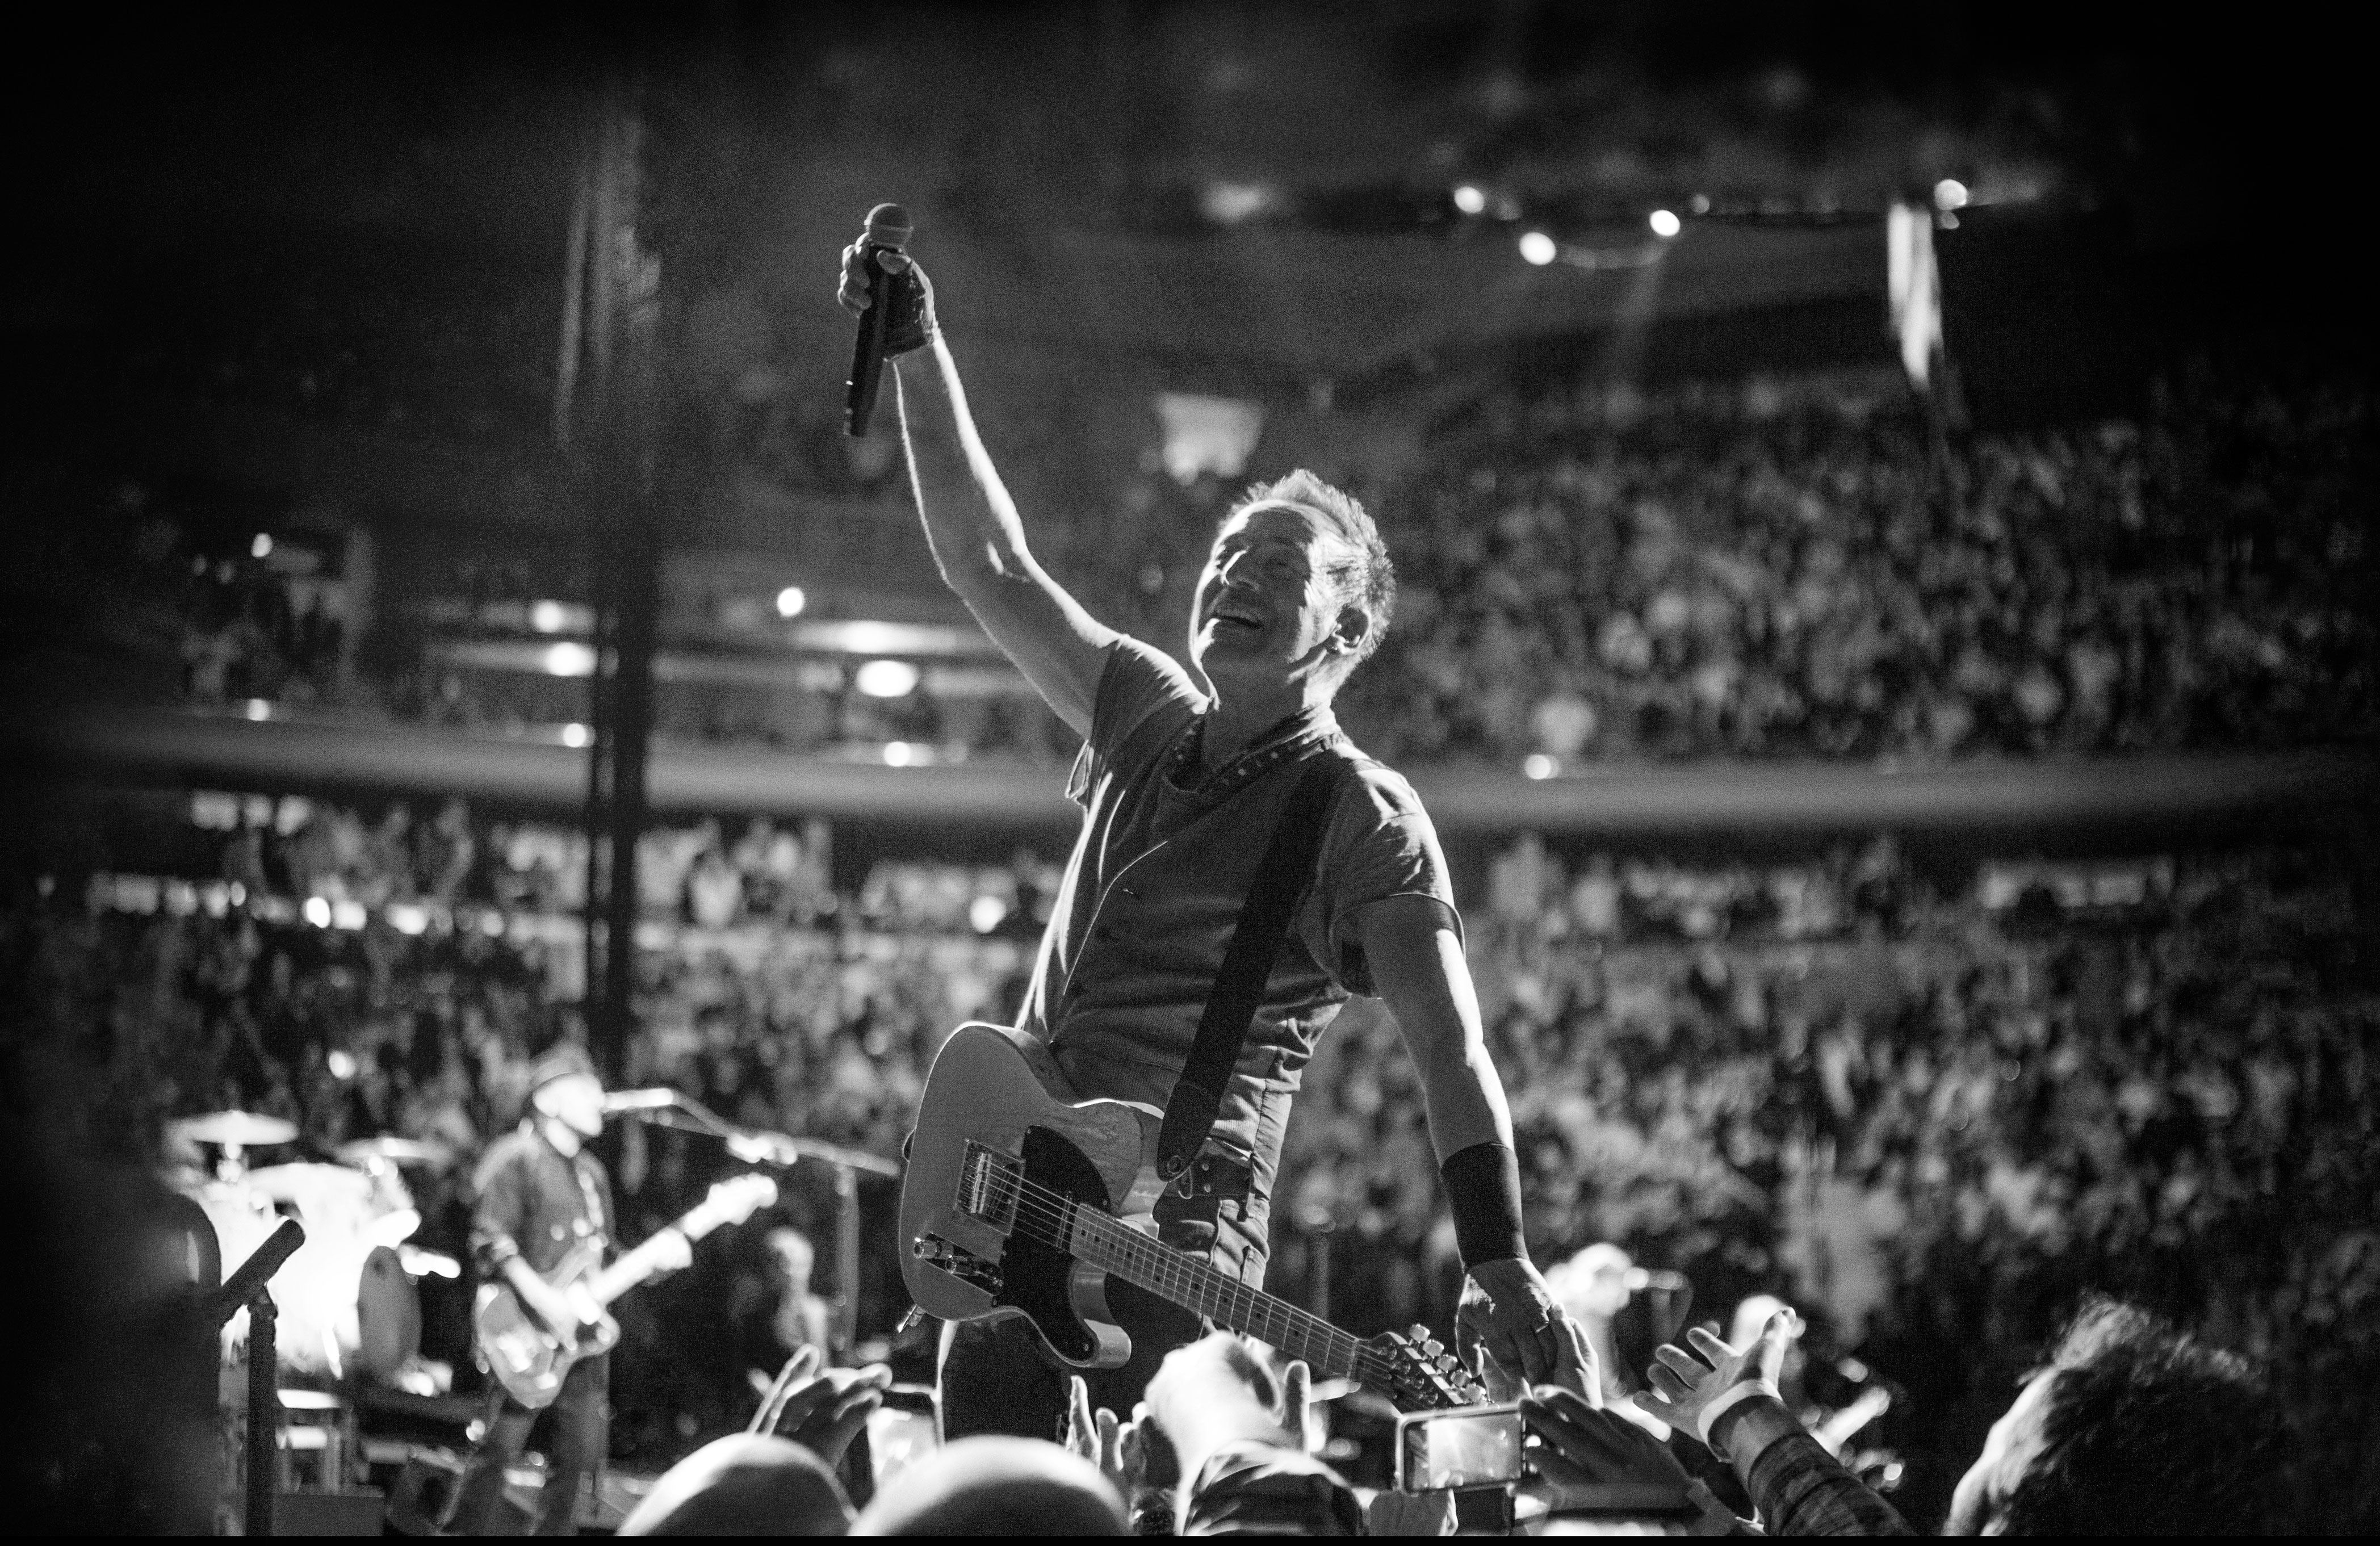 Bruce Springsteen, his electric guitar slung around him, raises a microphone in the air